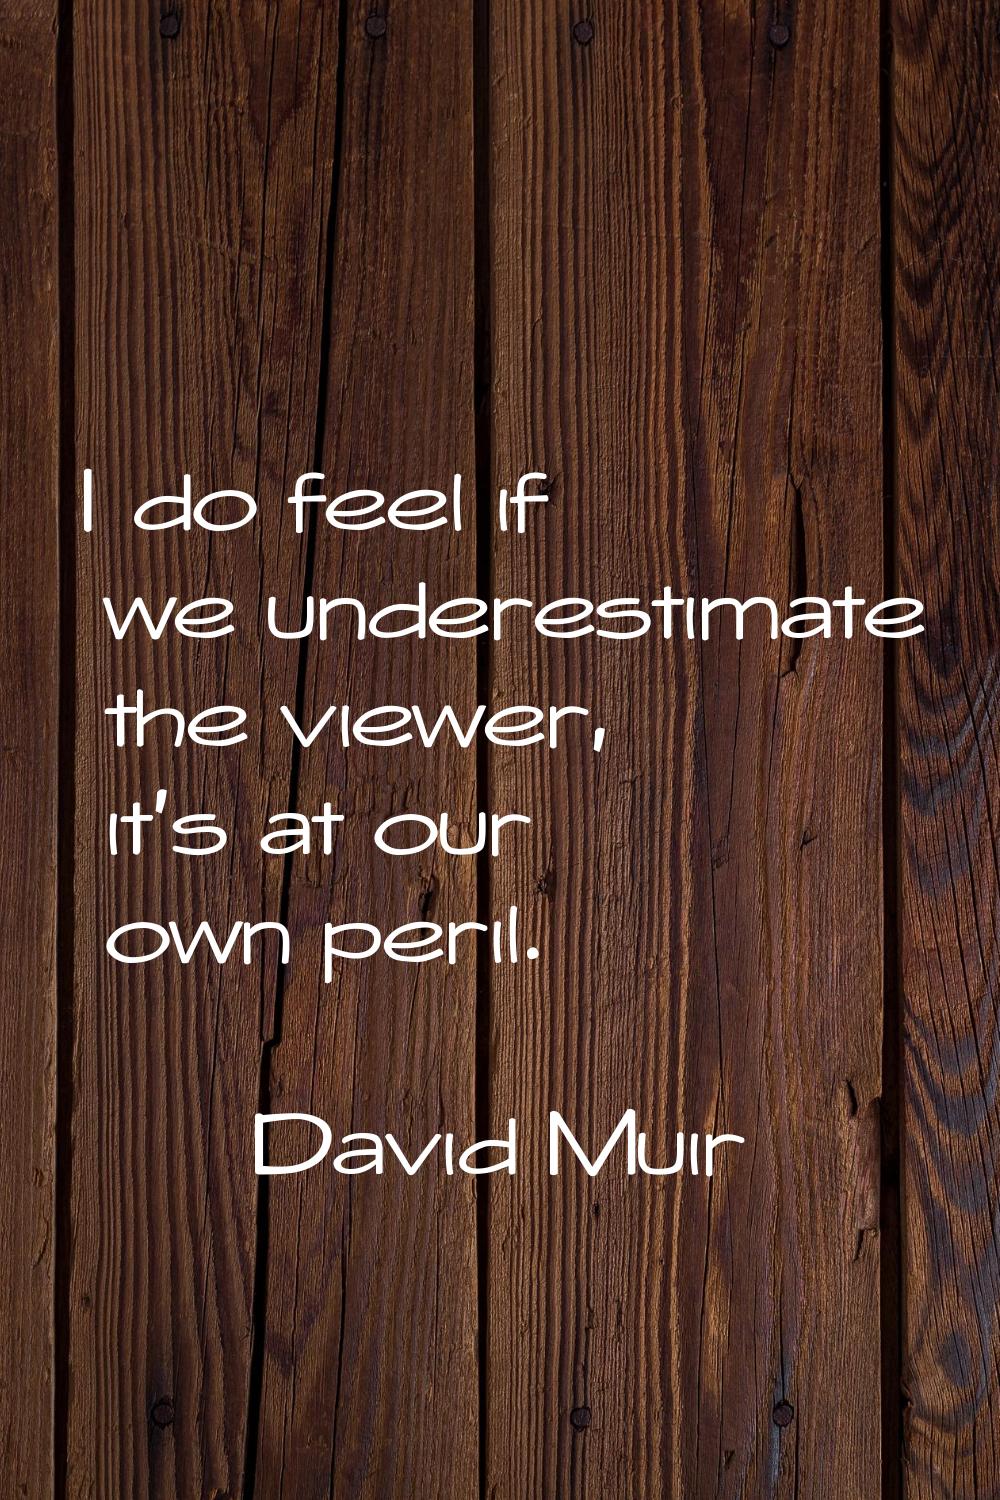 I do feel if we underestimate the viewer, it's at our own peril.